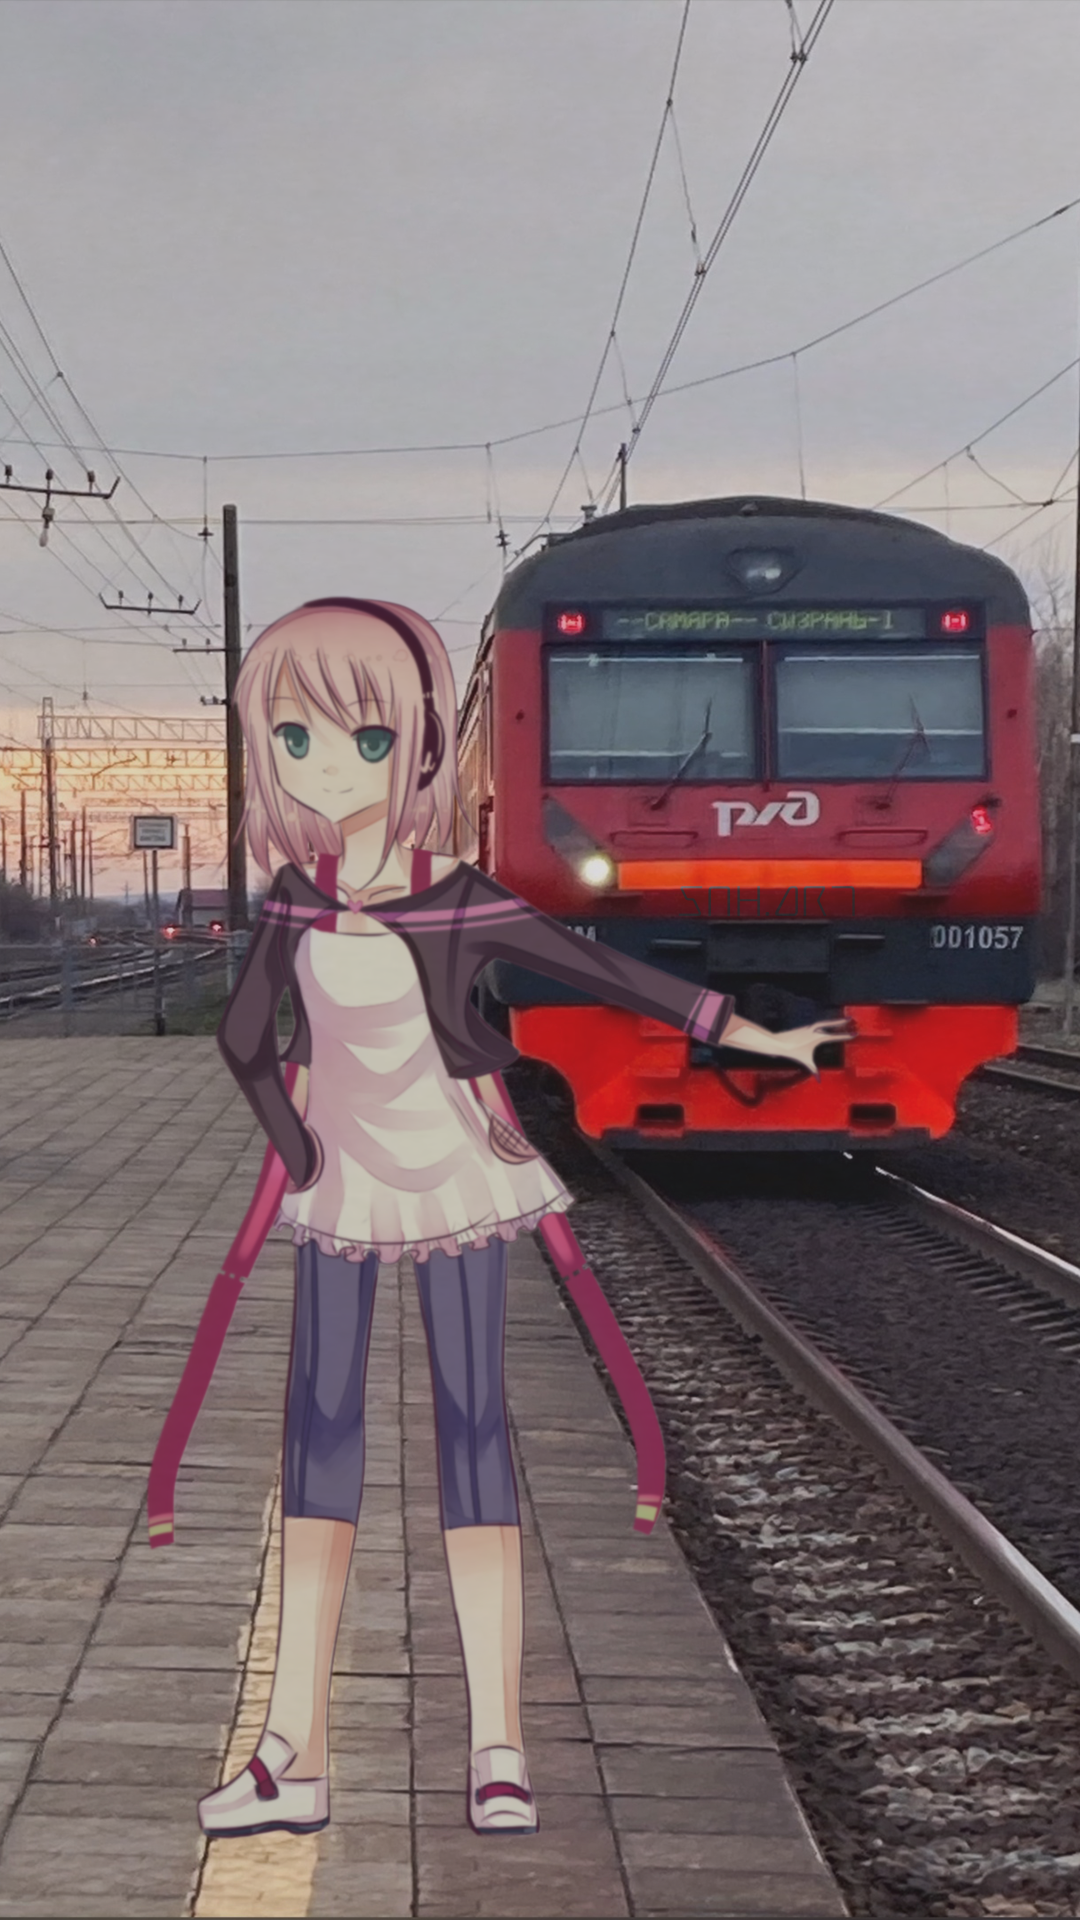 Animeirl Train Station Railway Suburb Russia Anime Girls Portrait Display Looking At Viewer 1080x1920